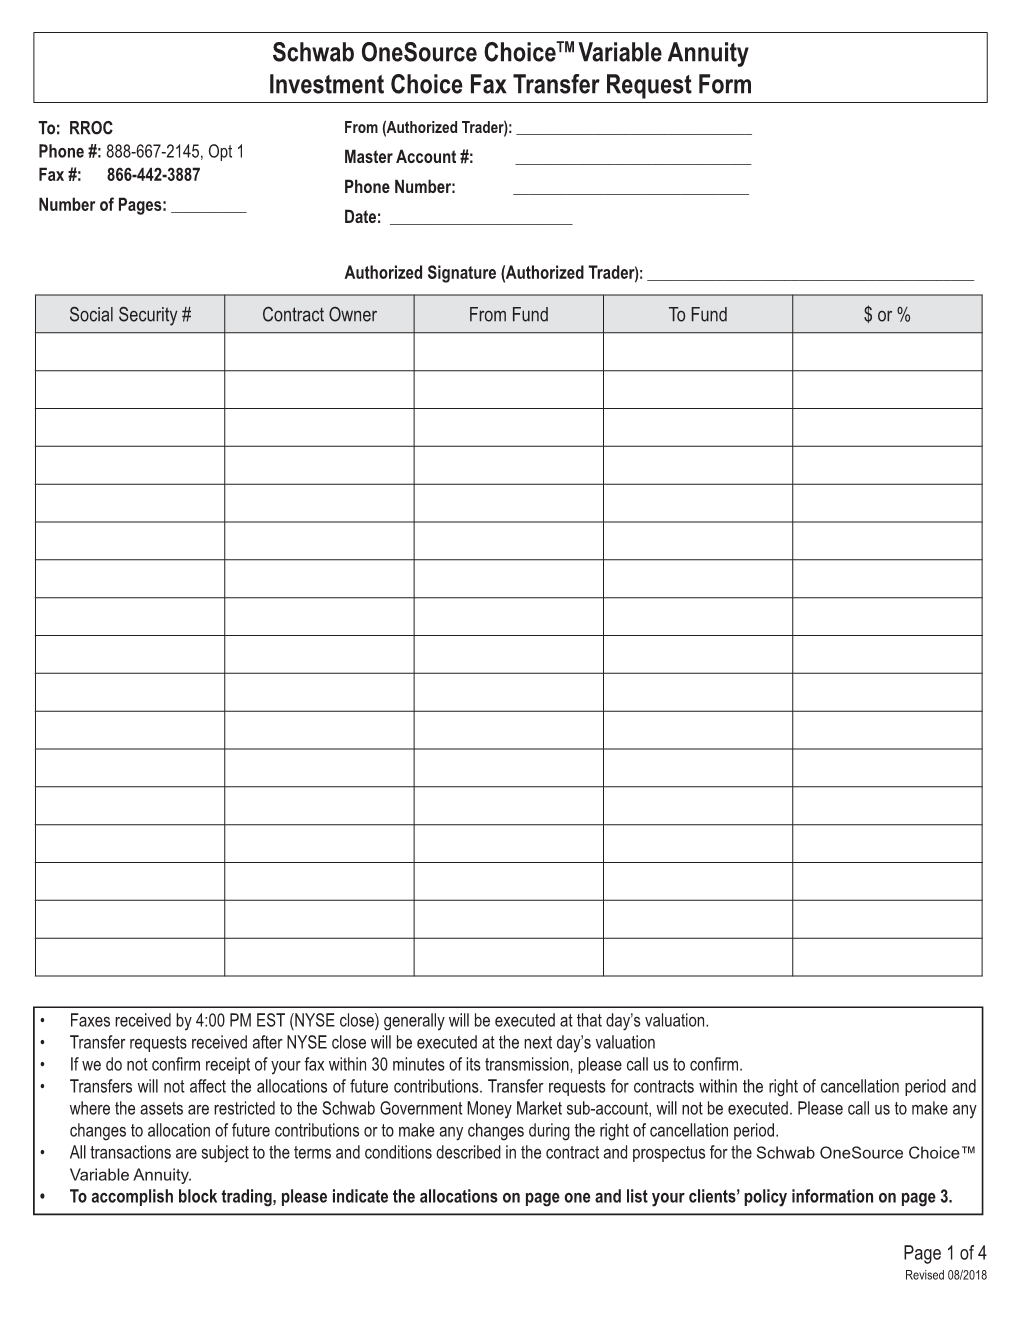 Schwab Onesource Choicetm Variable Annuity Investment Choice Fax Transfer Request Form